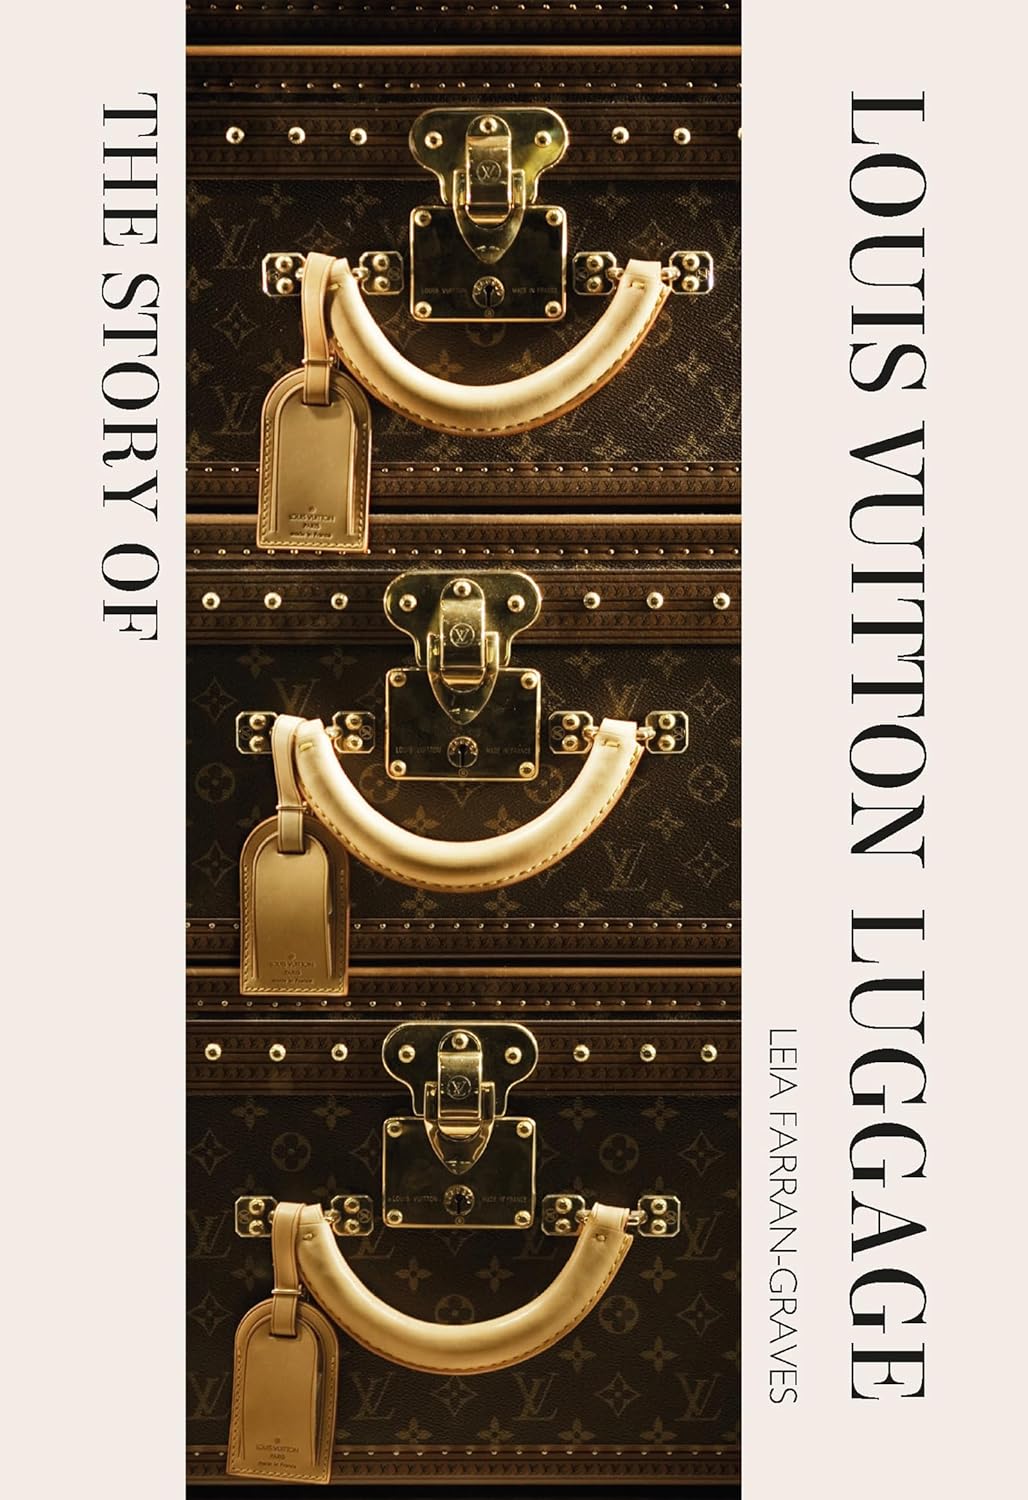 The Story of the Louis Vuitton Luggage